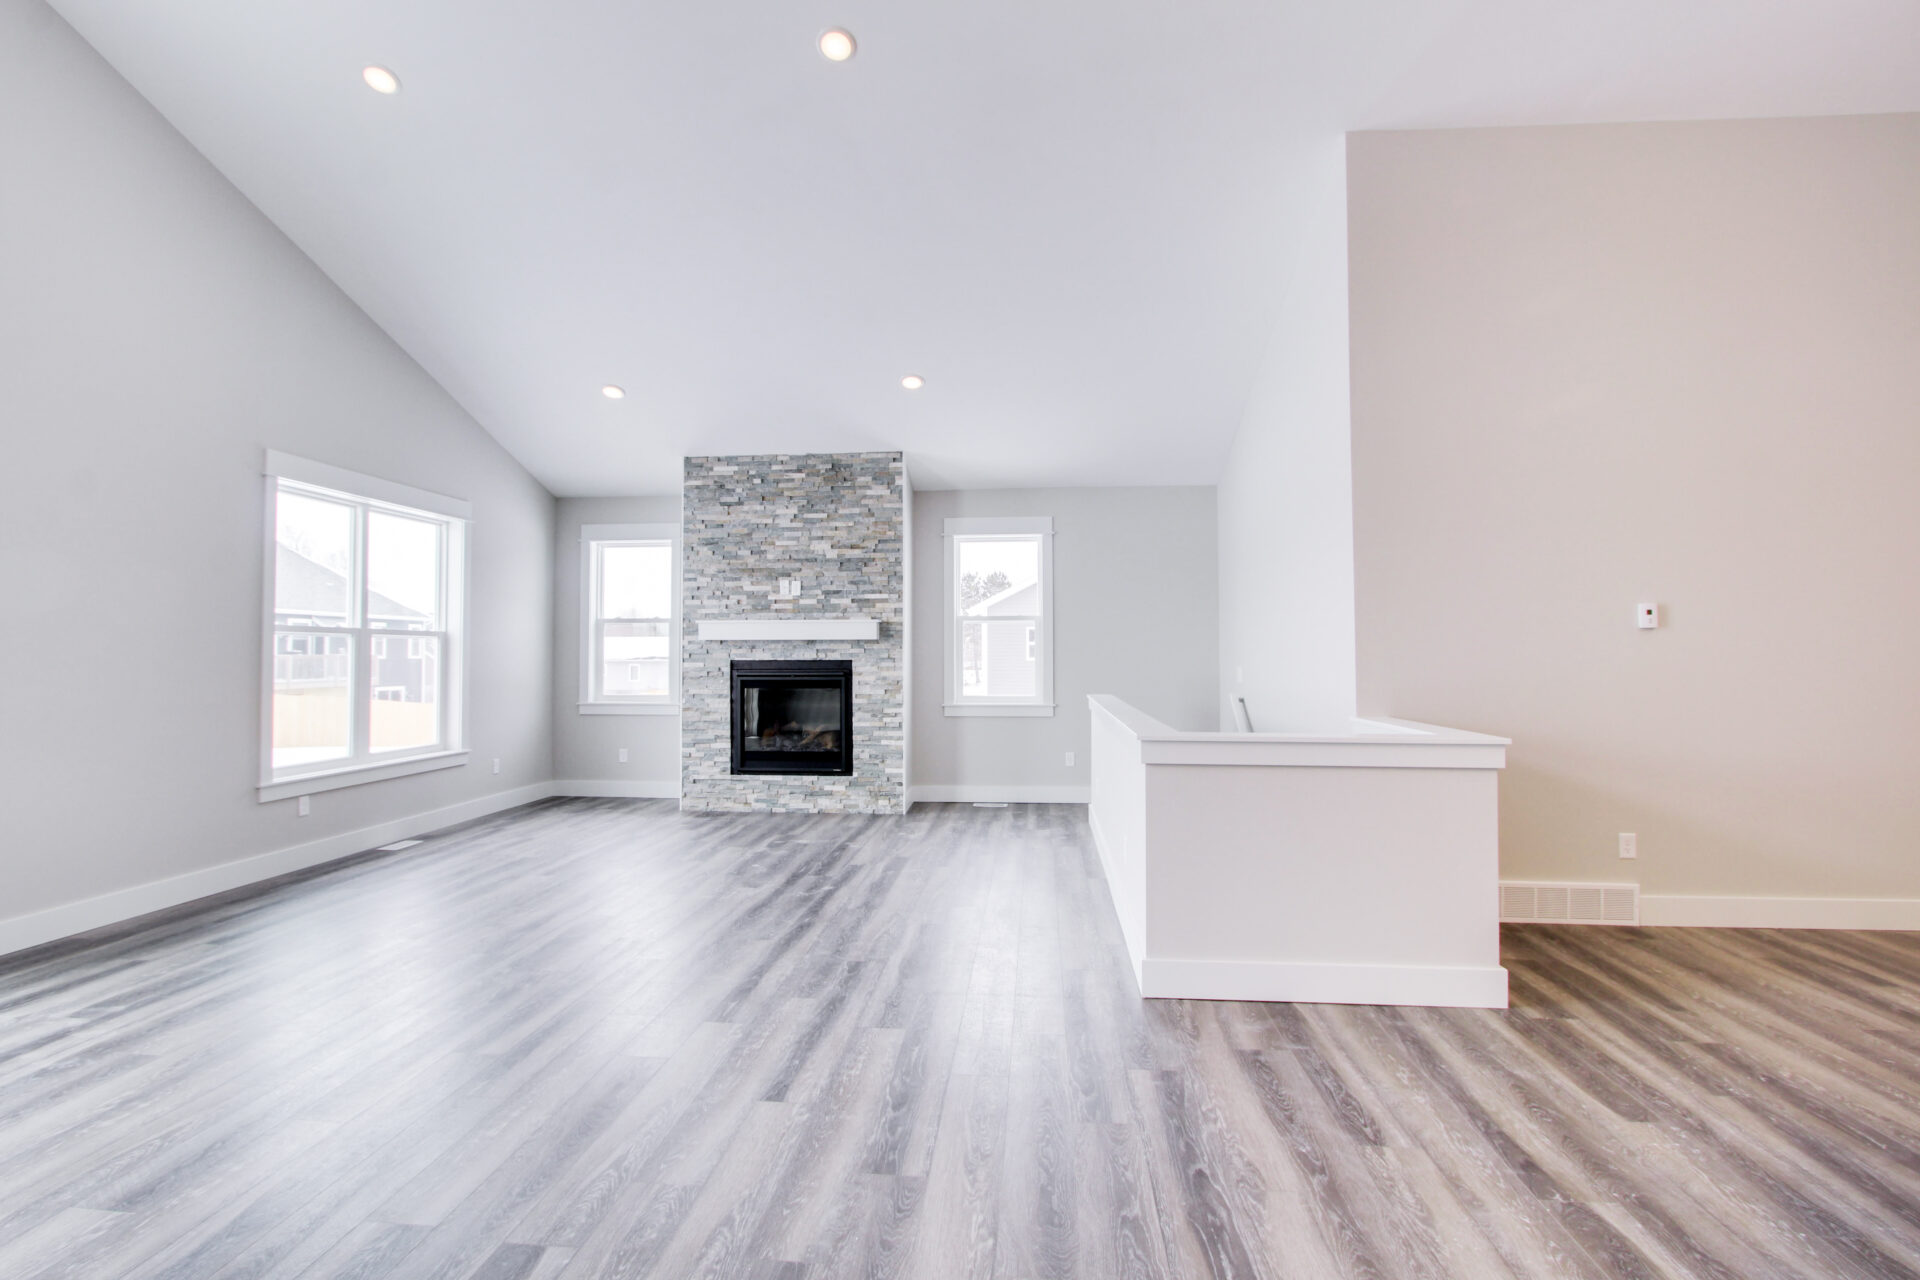 Empty living room with a fireplace, white walls and hardwood floor